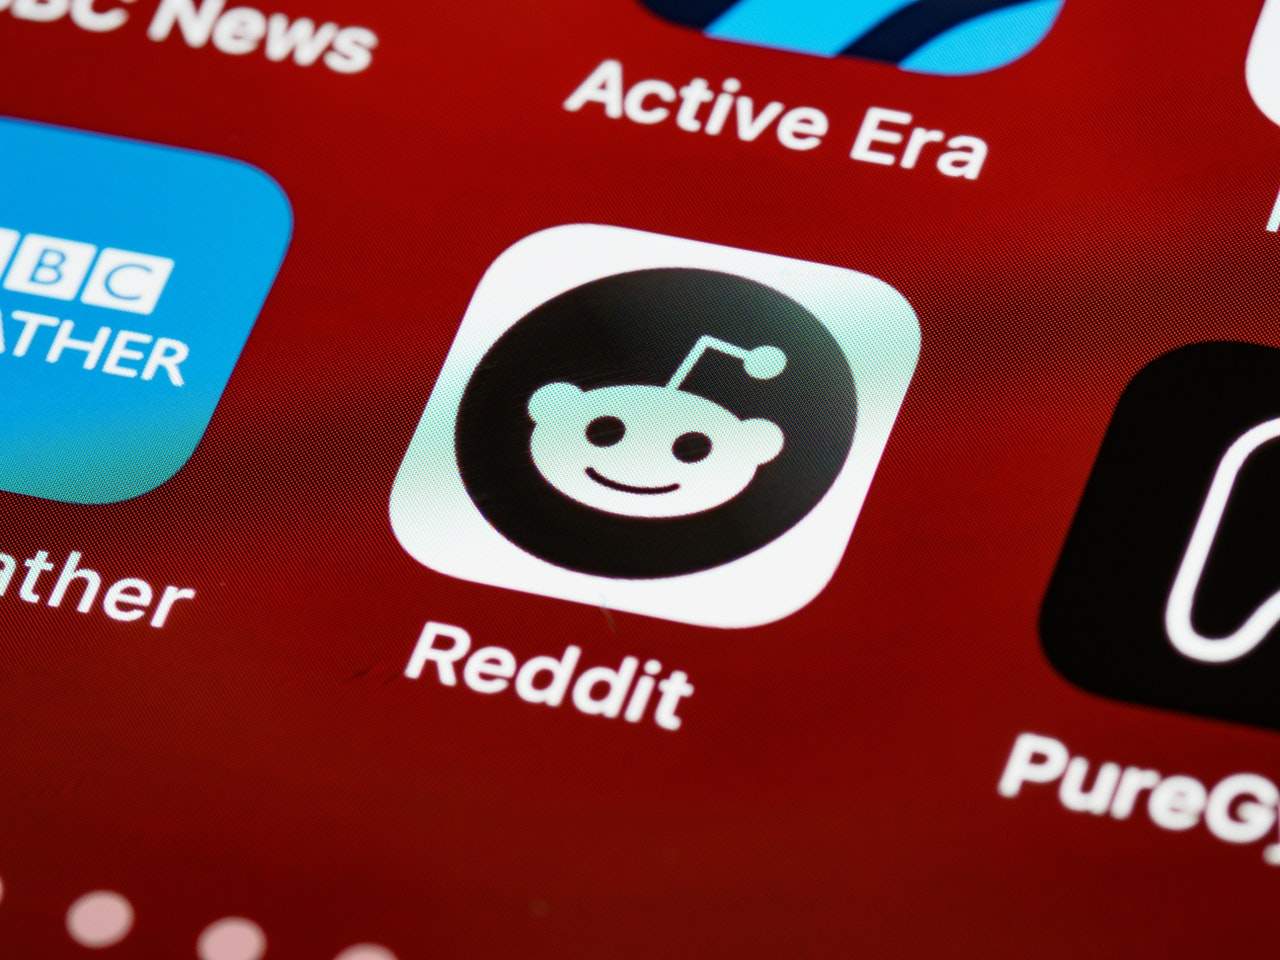 How To See Deleted Reddit Posts and Comments (5 Ways)